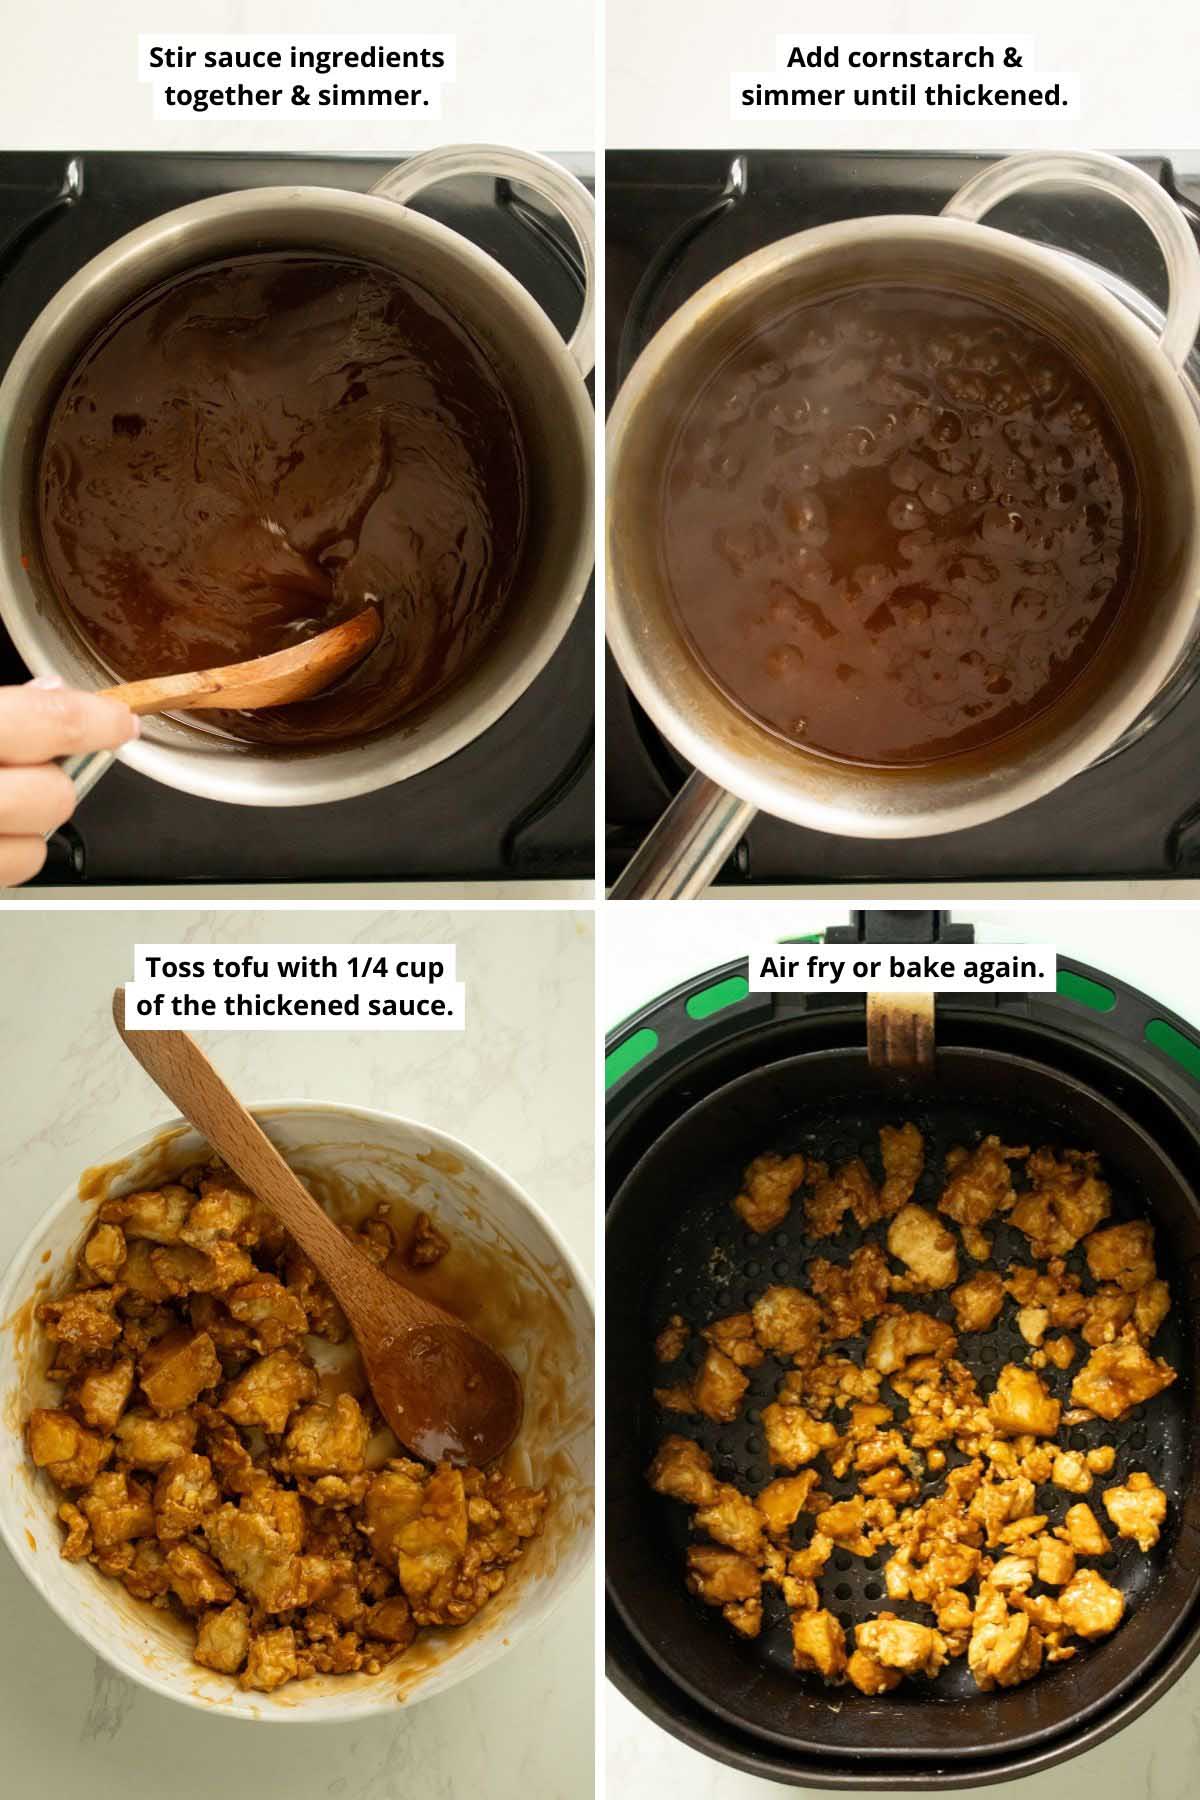 image collage showing the General Tso's sauce before and after boiling and the tofu tossed in the sauce and spread into the air fryer basket